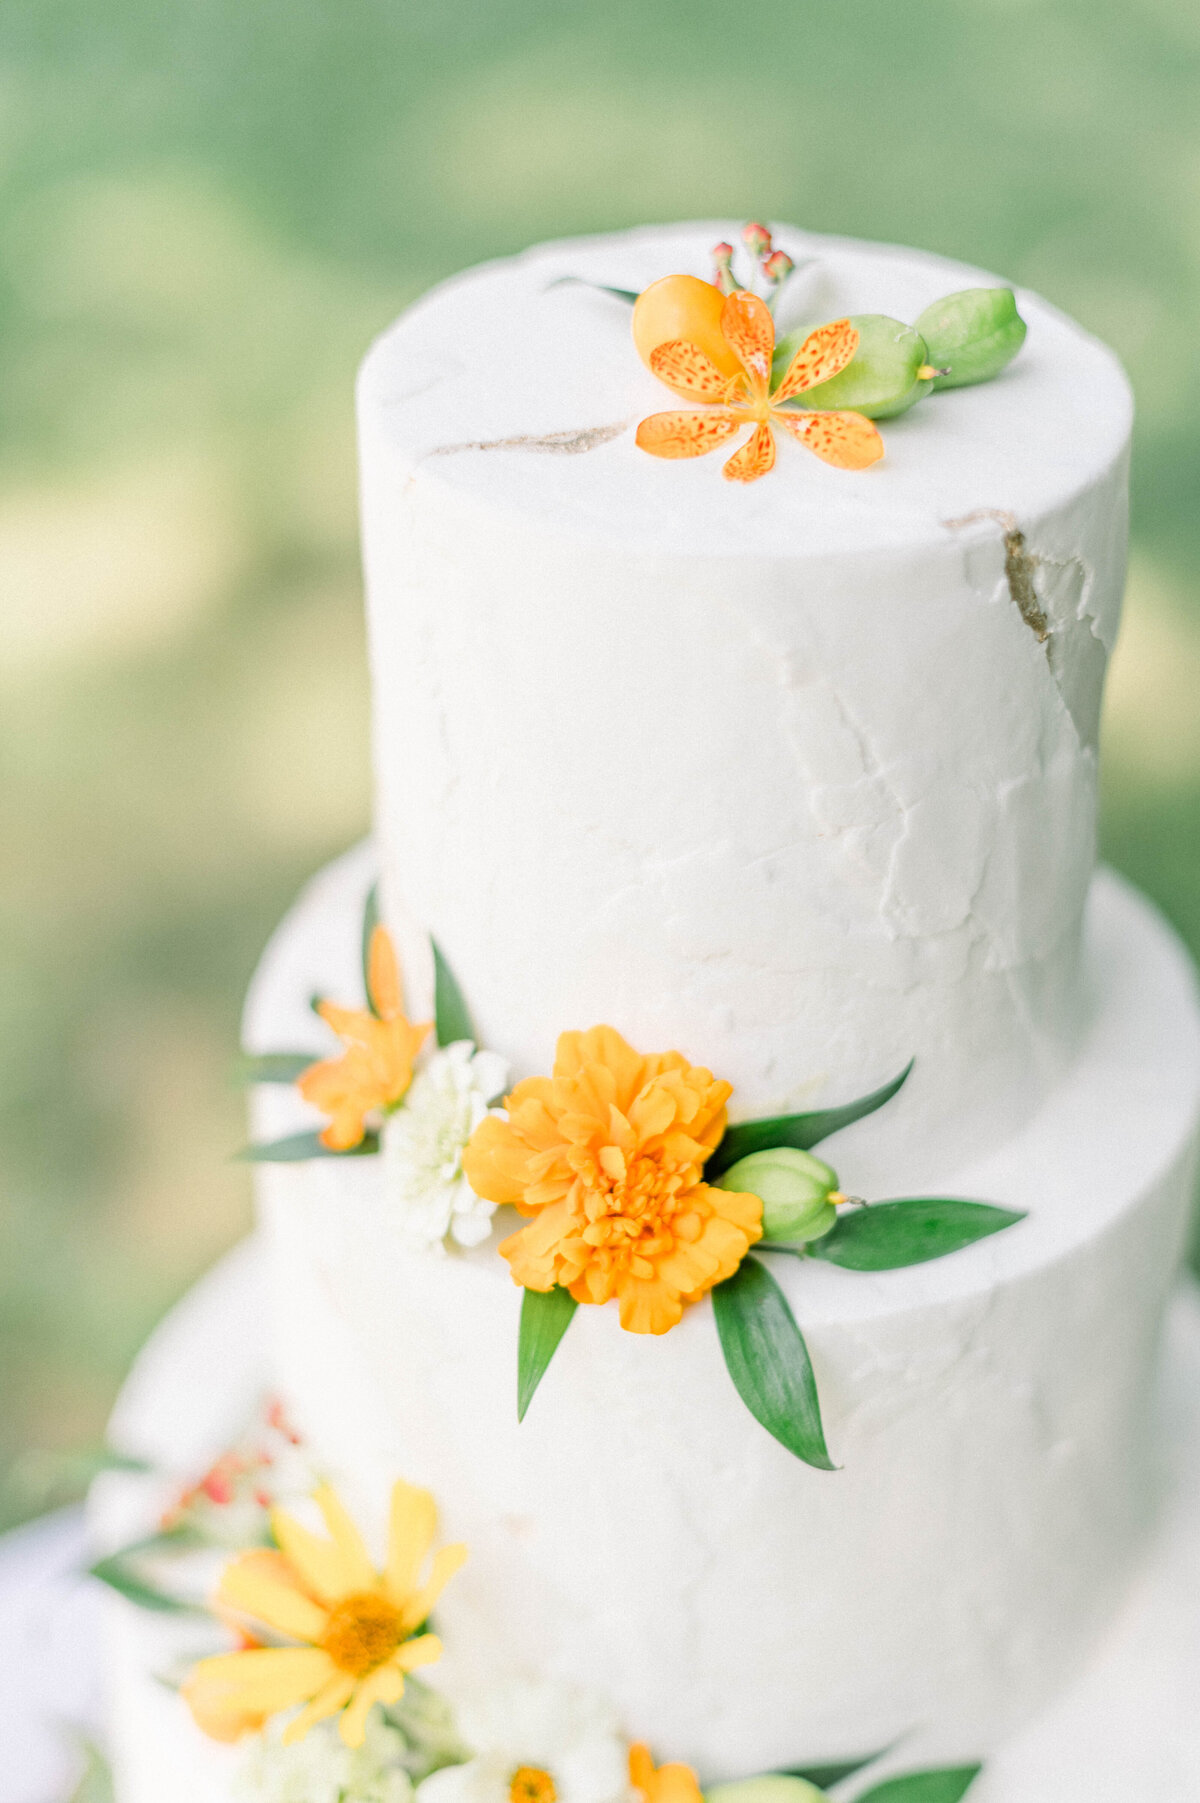 Summer wildflowers used as decor for a wedding cake